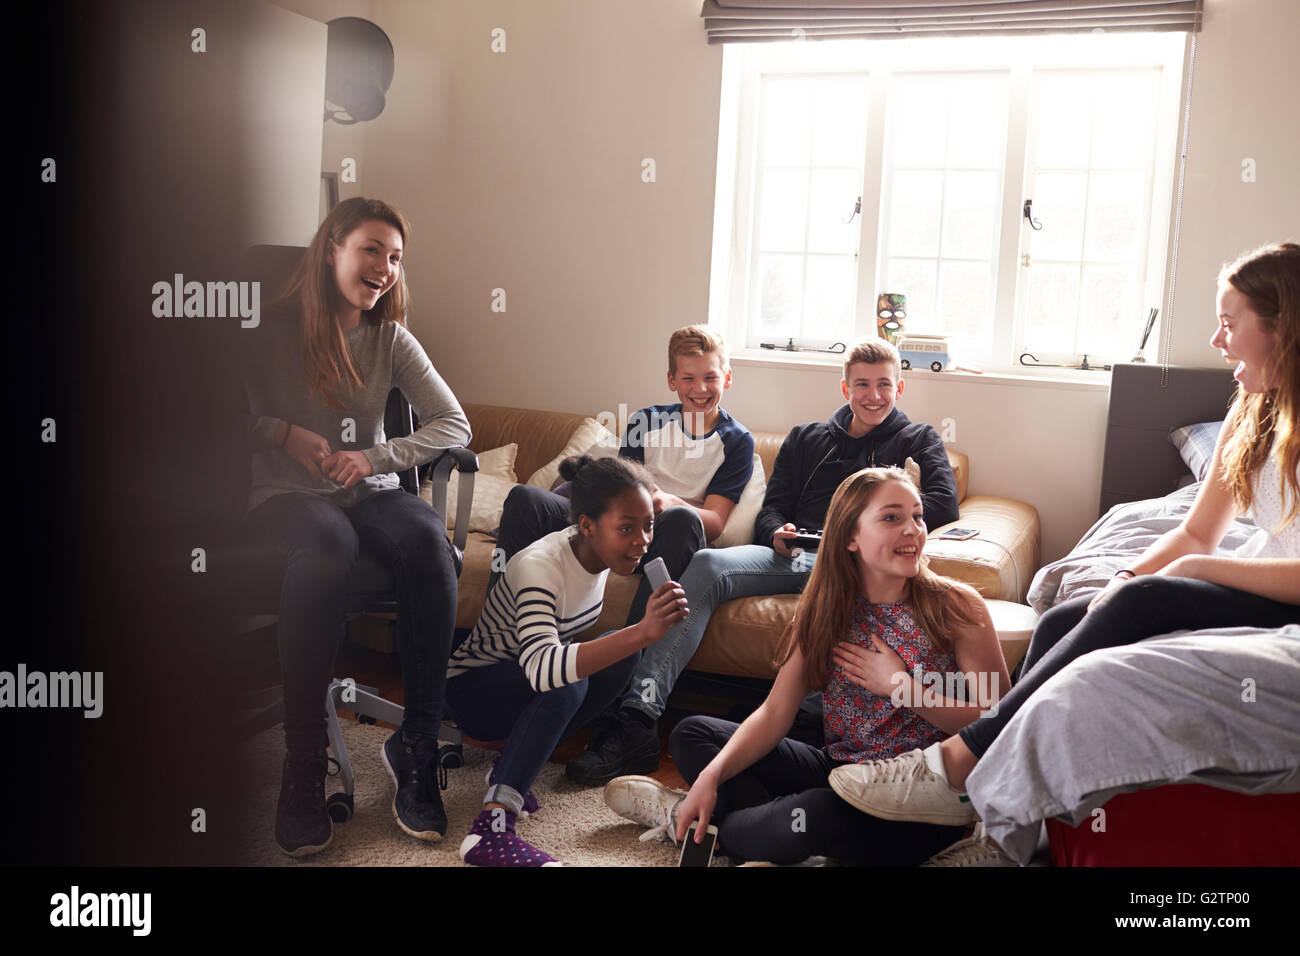 Group Of Teenagers Hanging Out In Bedroom Together Stock Photo